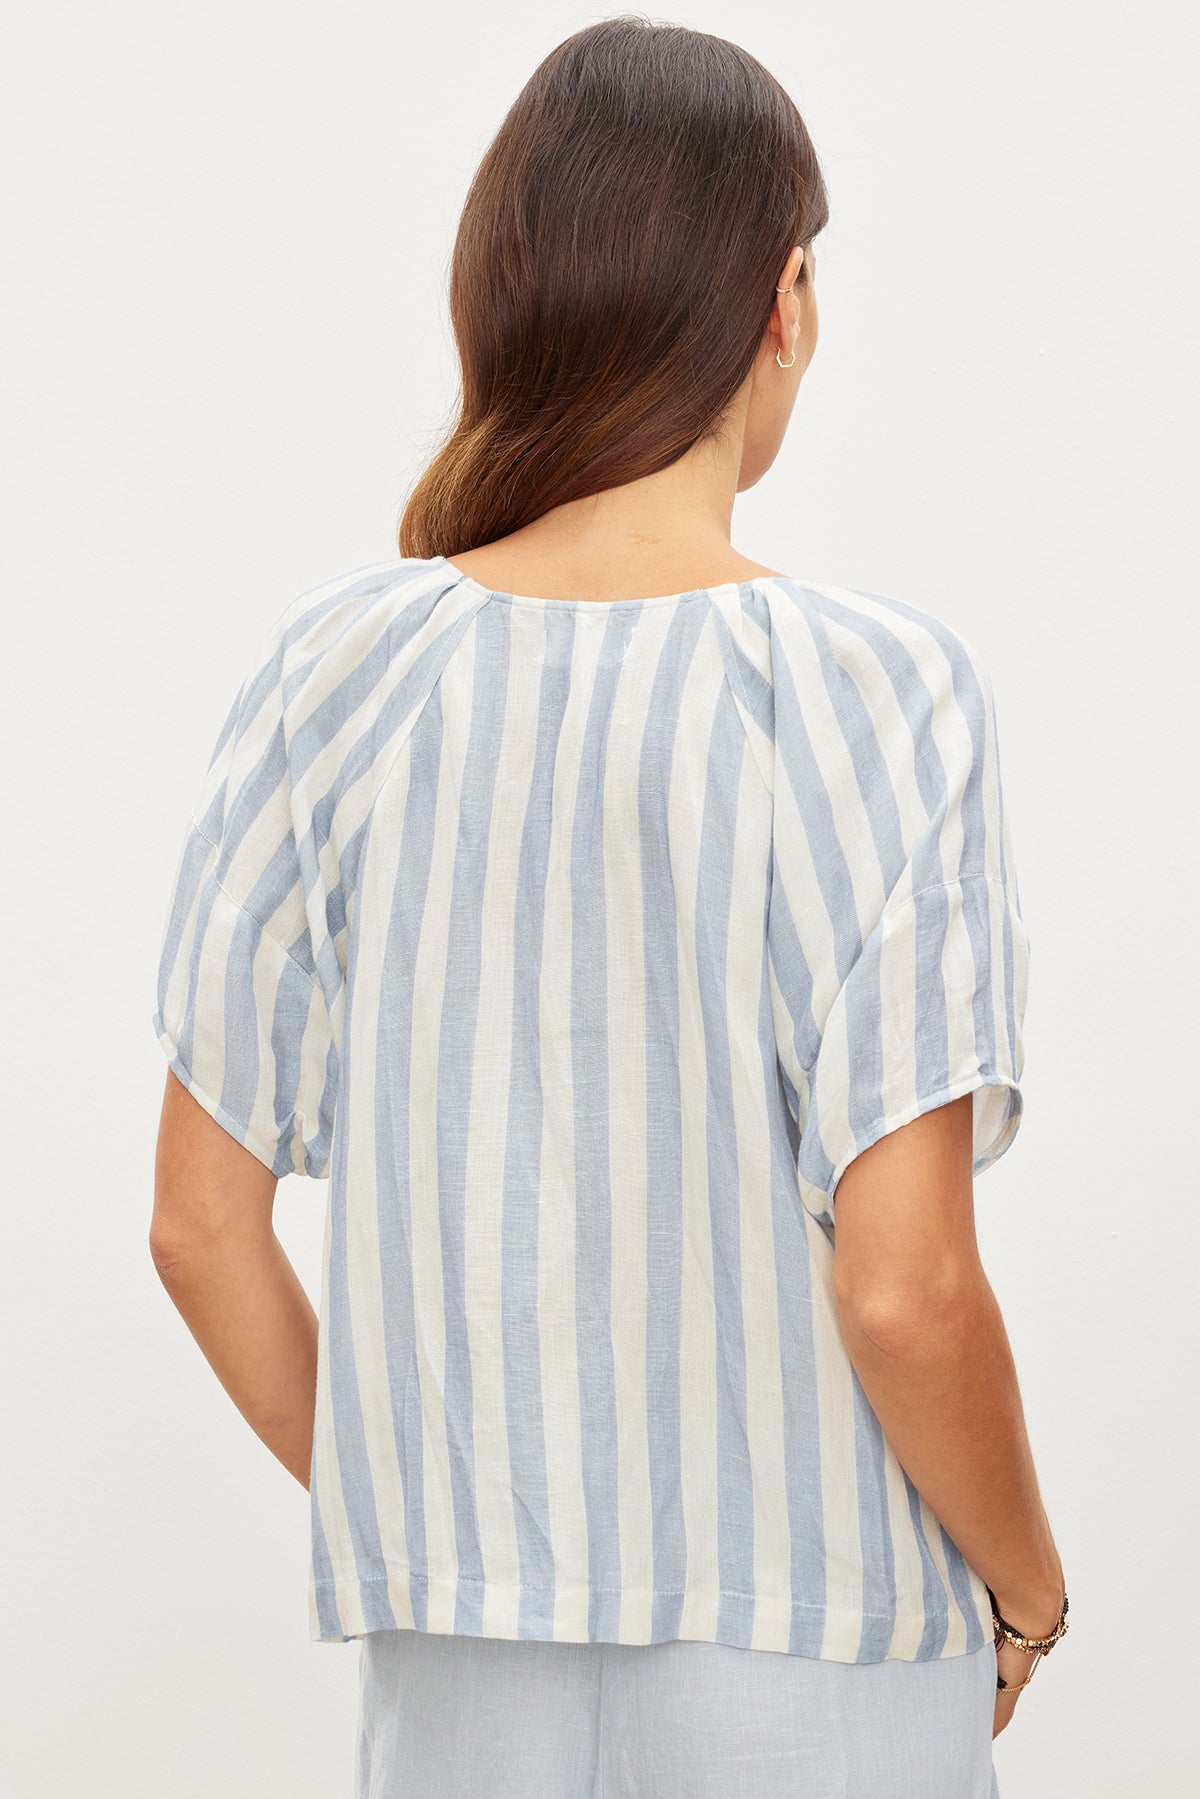   The back view of a woman wearing a Velvet by Graham & Spencer KATY STRIPED LINEN TOP with West Coast vibes. 